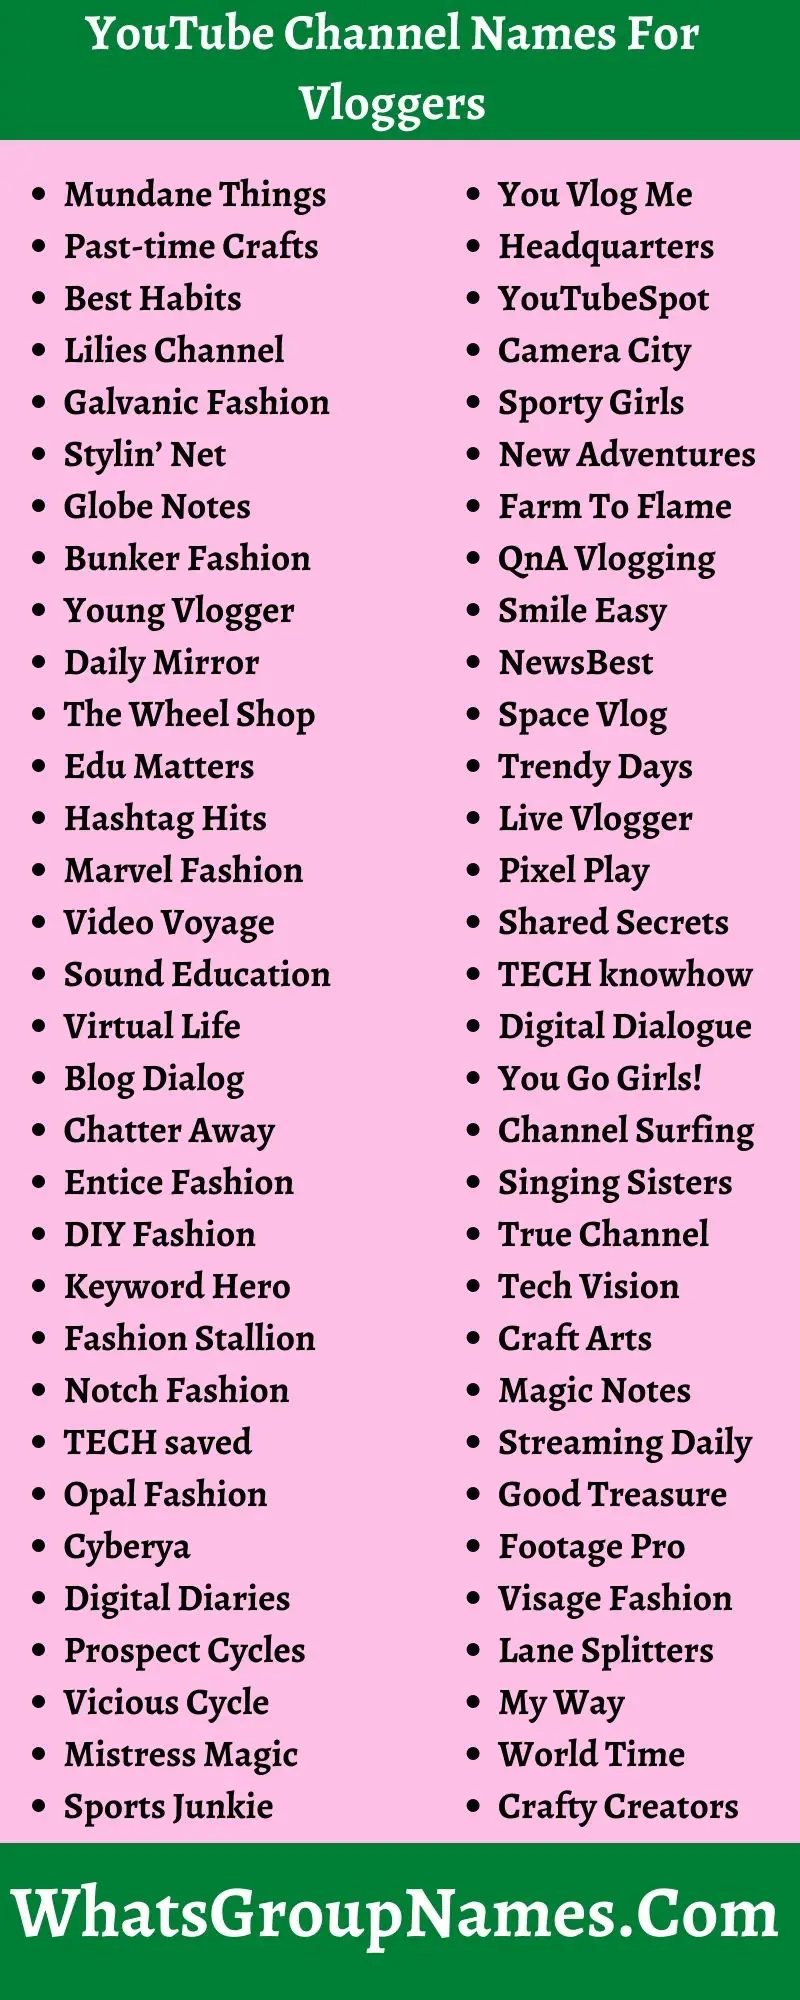 YouTube Channel Names For Vloggers